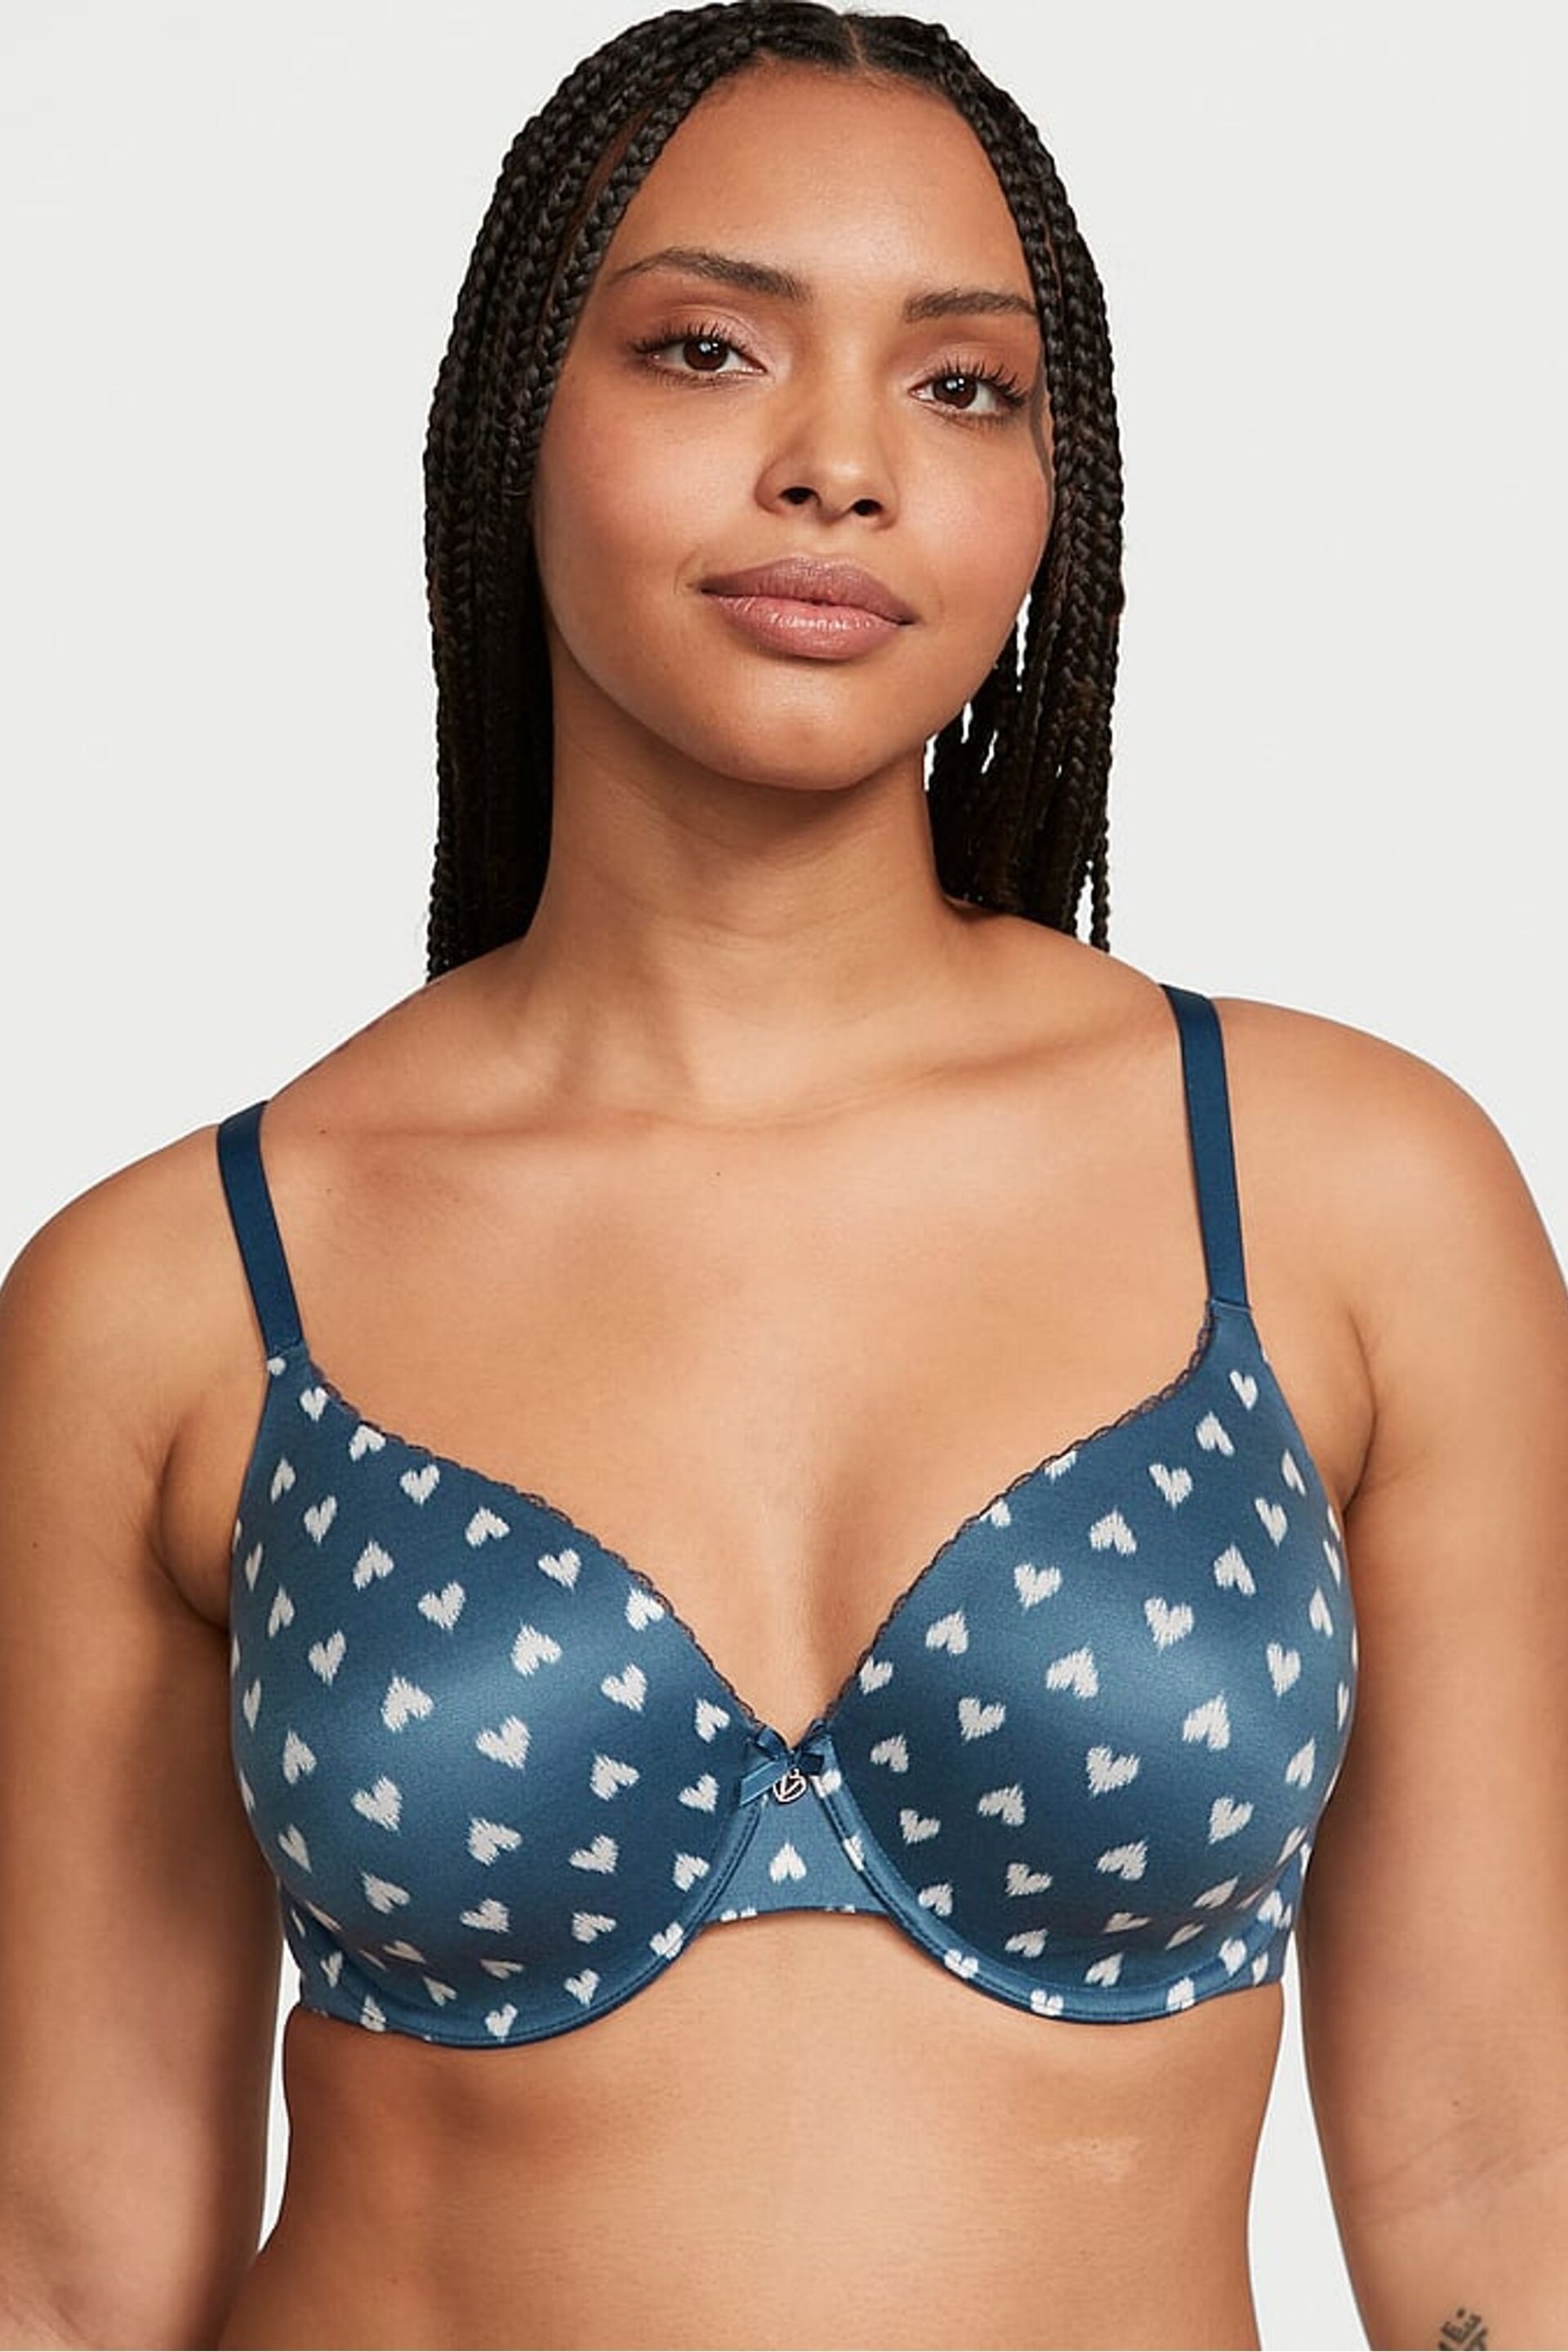 Victoria's Secret Midnight Sea Navy Blue Heart Lightly Lined Full Cup Bra - Image 1 of 3